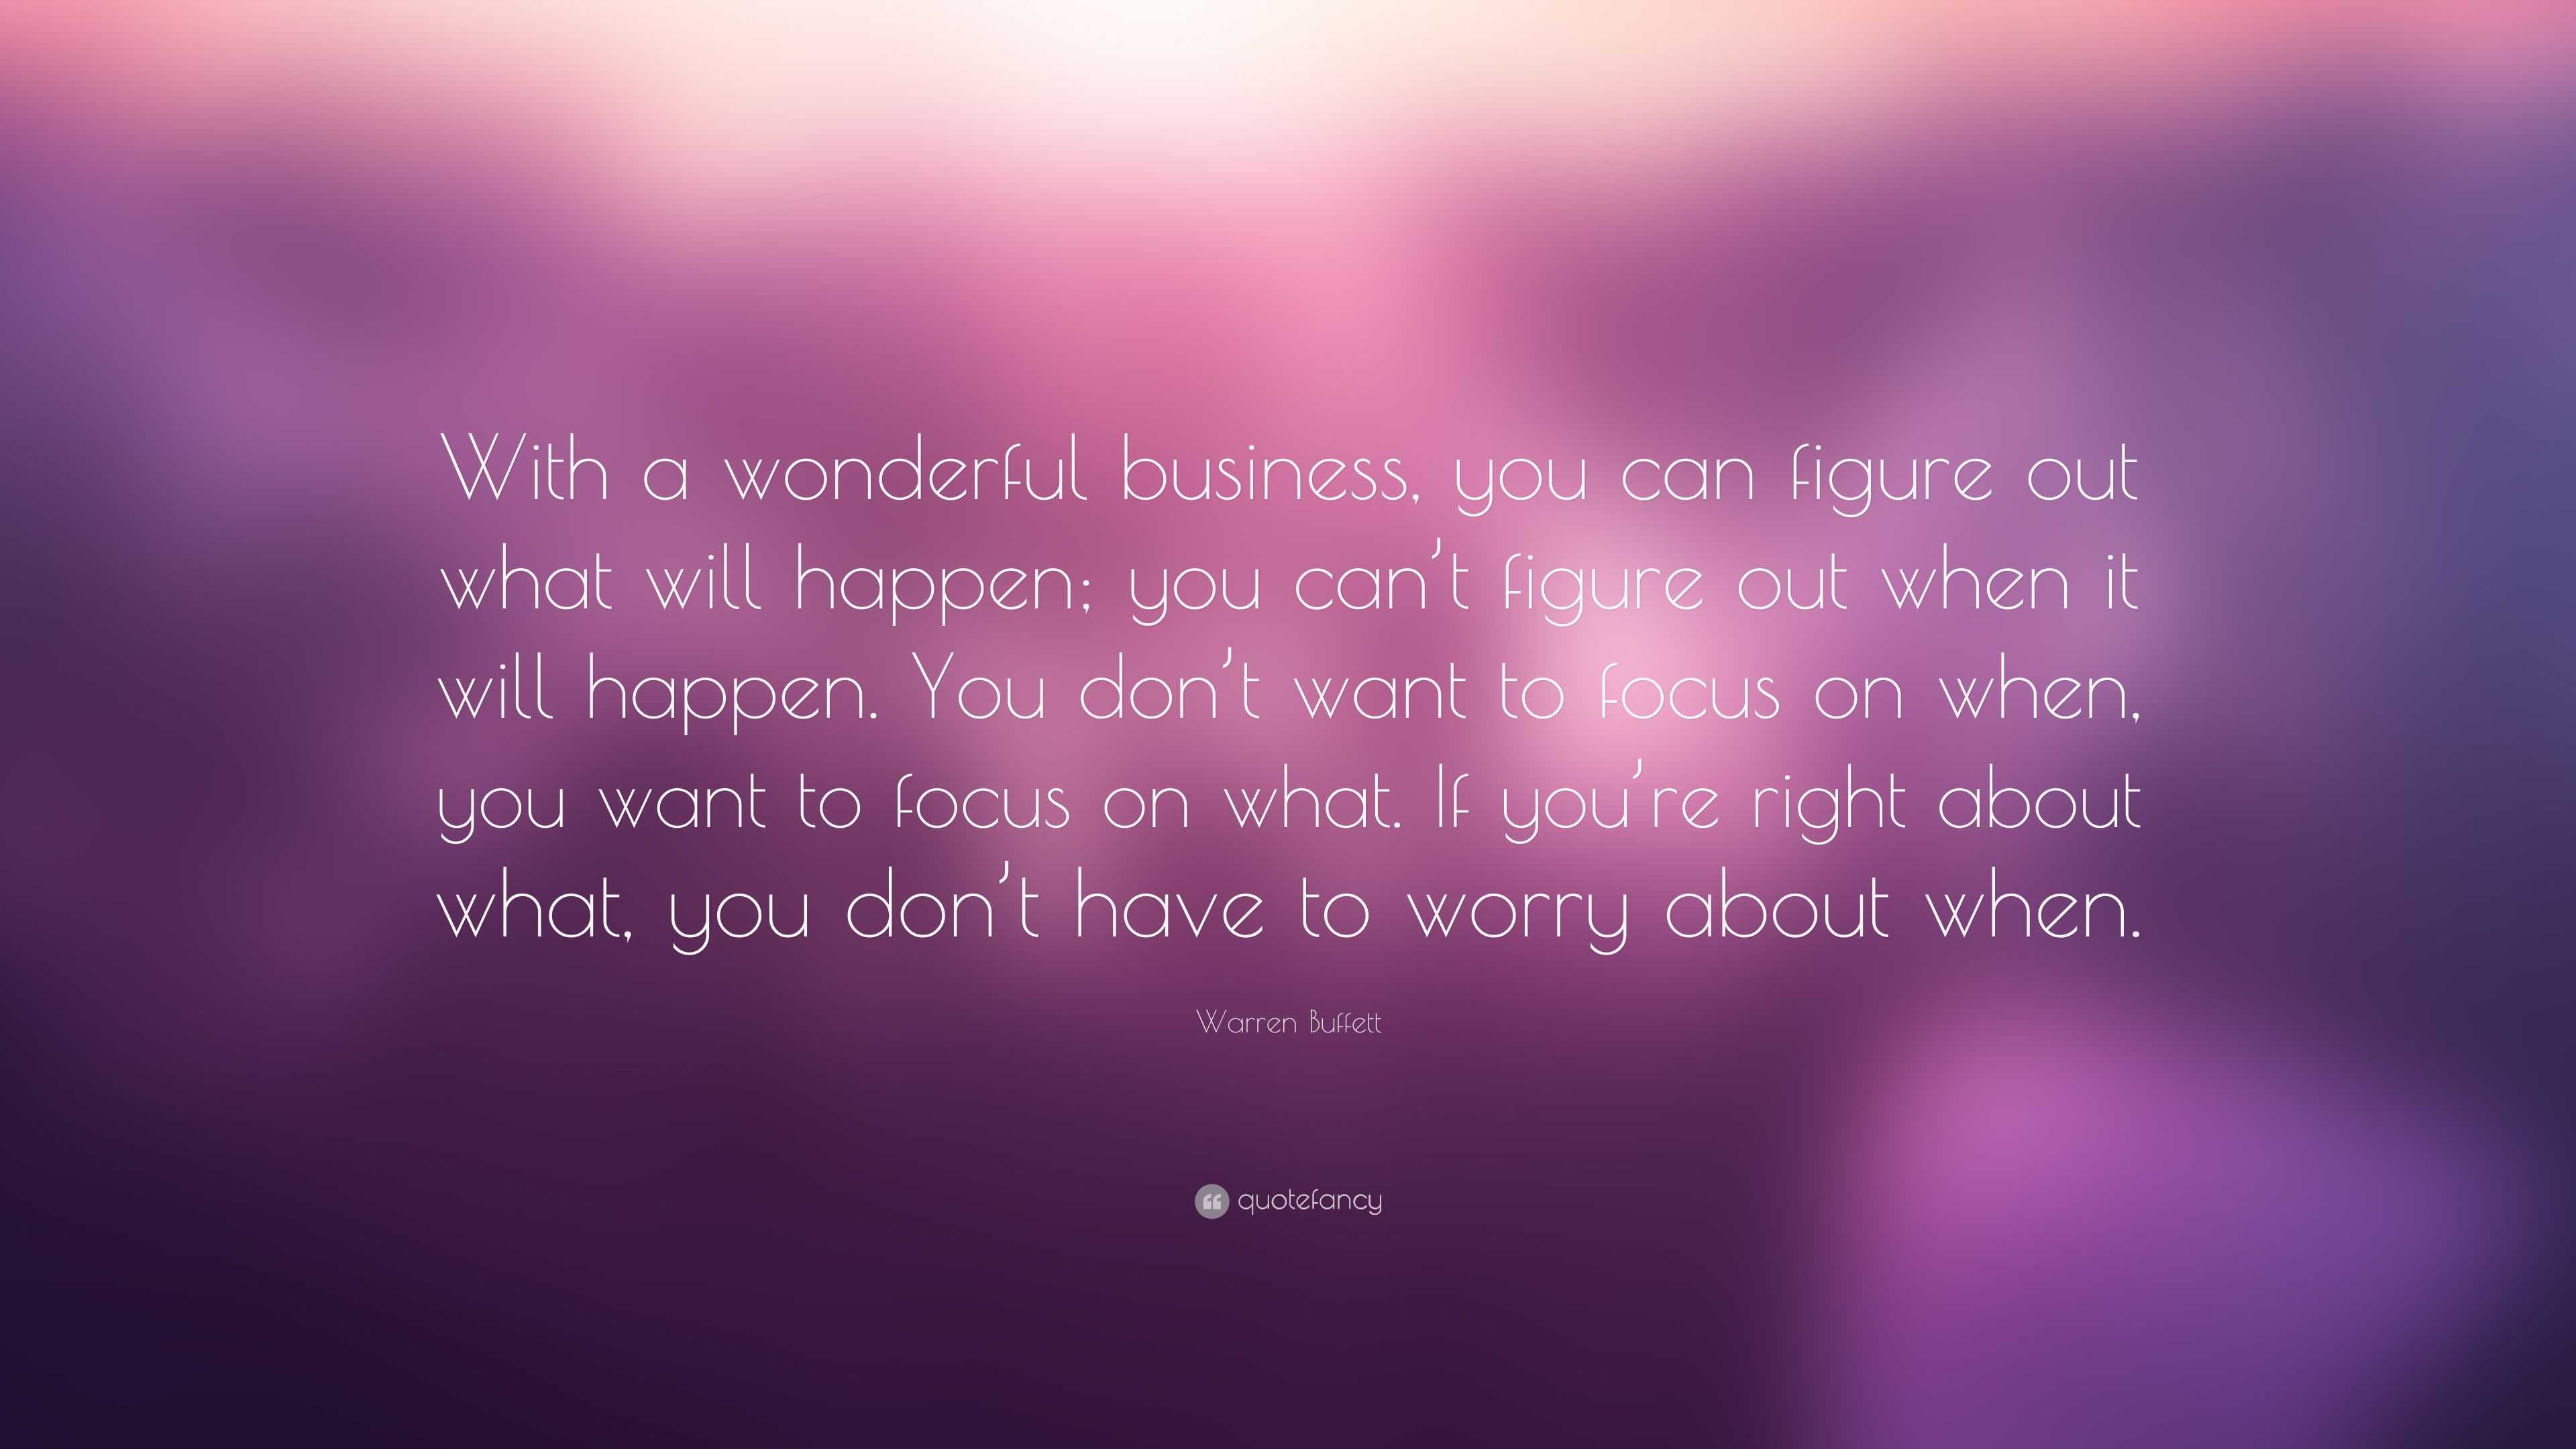 Warren Buffett Quote: “With a wonderful business, you can figure out ...